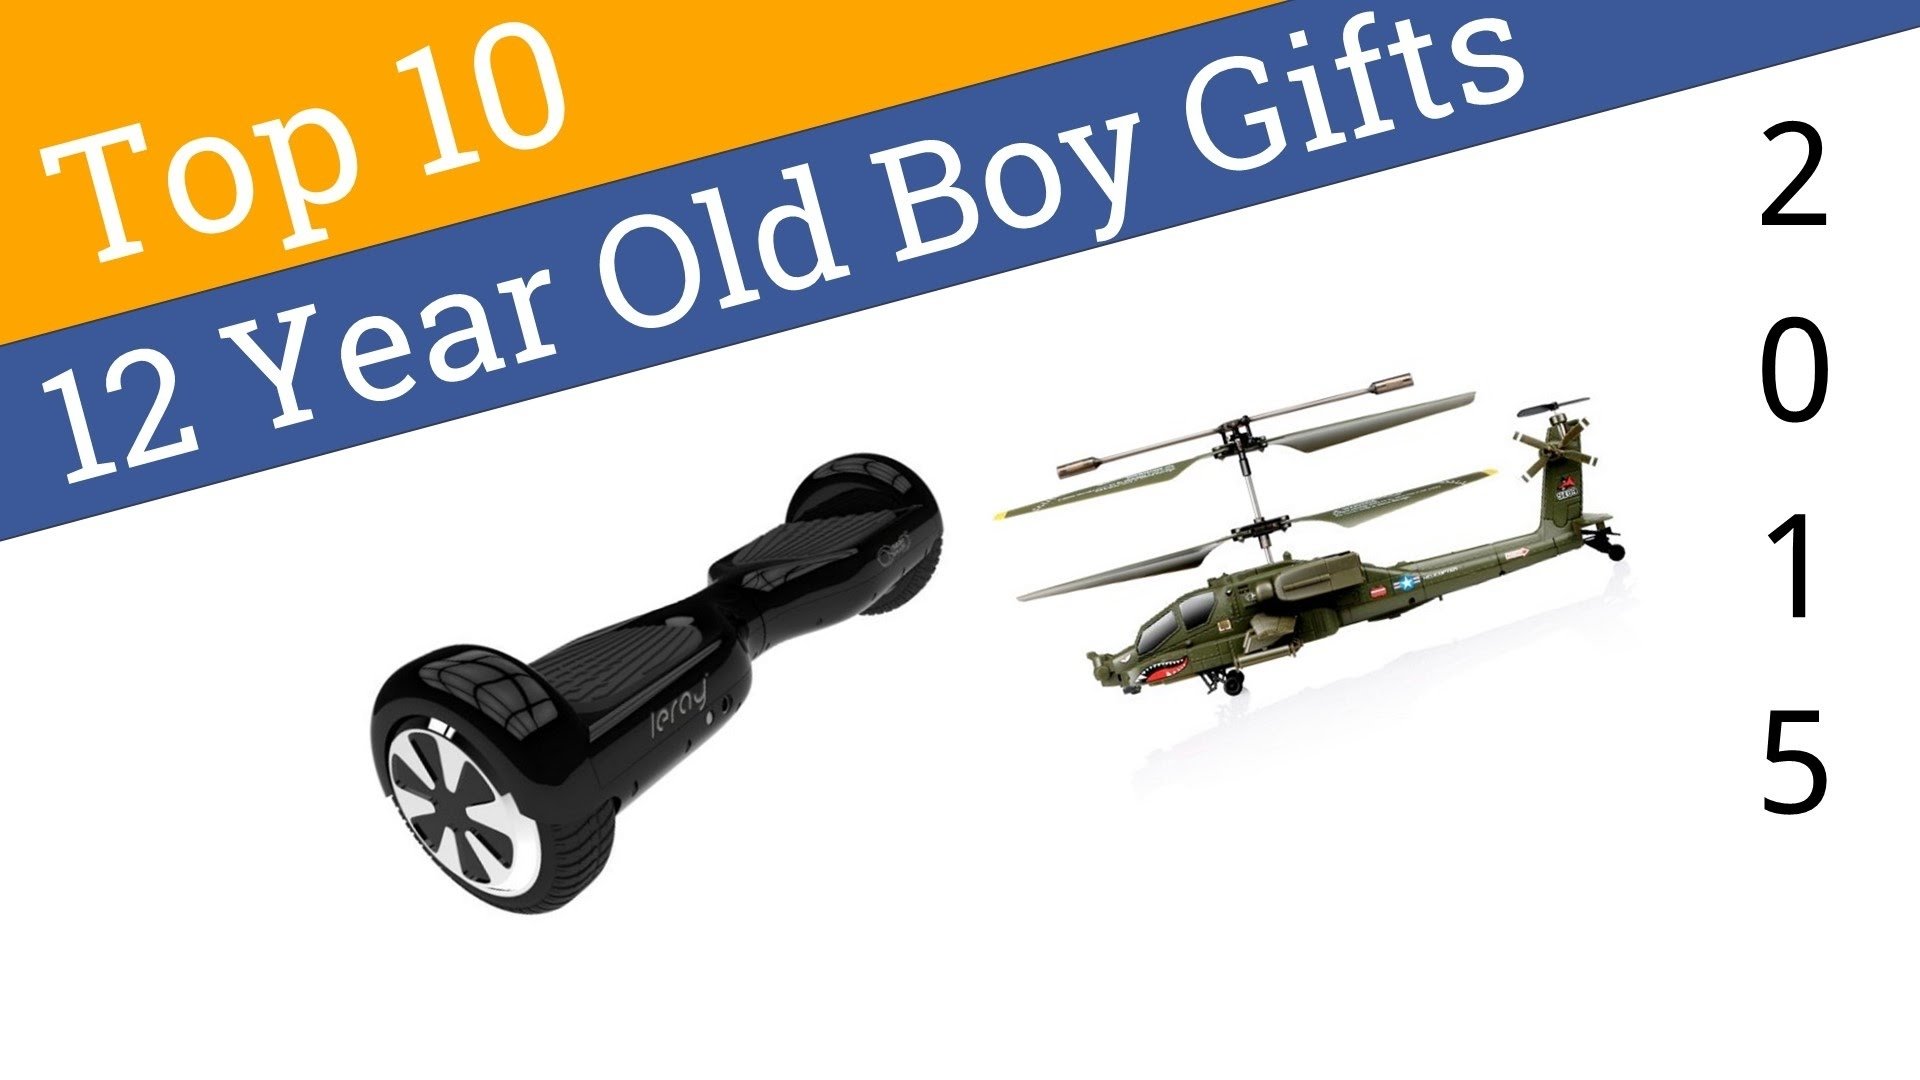 10 Attractive 12 Year Old Boy Christmas Gift Ideas 10 best 12 year old boy gifts 2015 youtube 3 2022